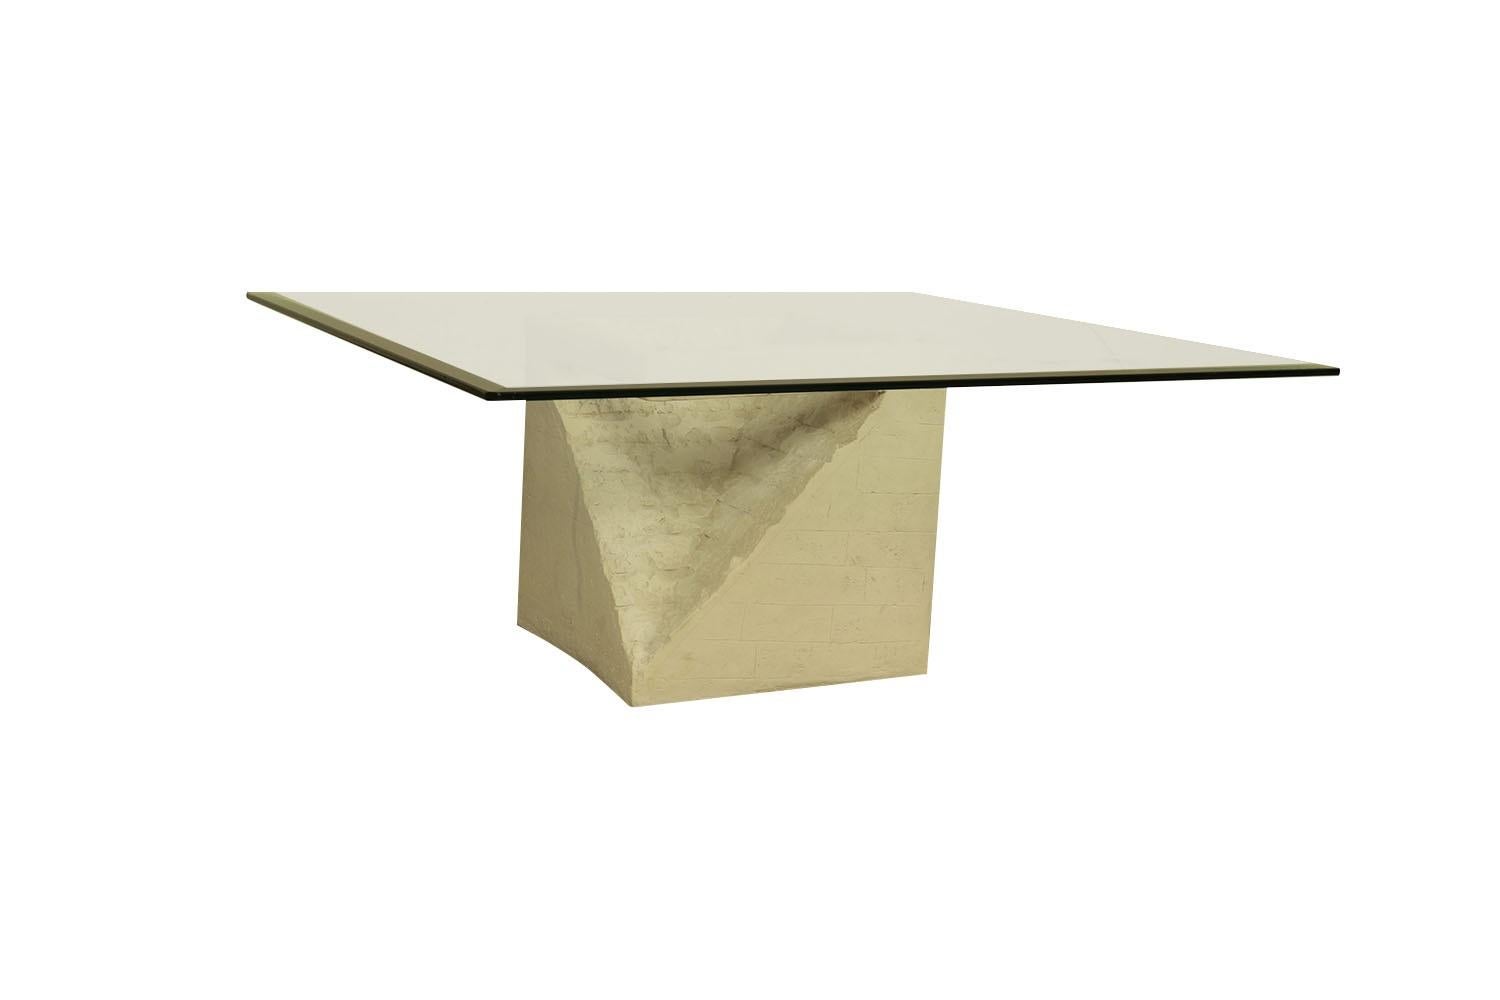 Superb postmodern sculpted Mactan stone and Glass Coffee Table with modernist design, elegant and luscious, ca 1970s, consisting of a light weight Mactan stone, hollow block pedestal base which supports the thick glass. This beautiful coffee table